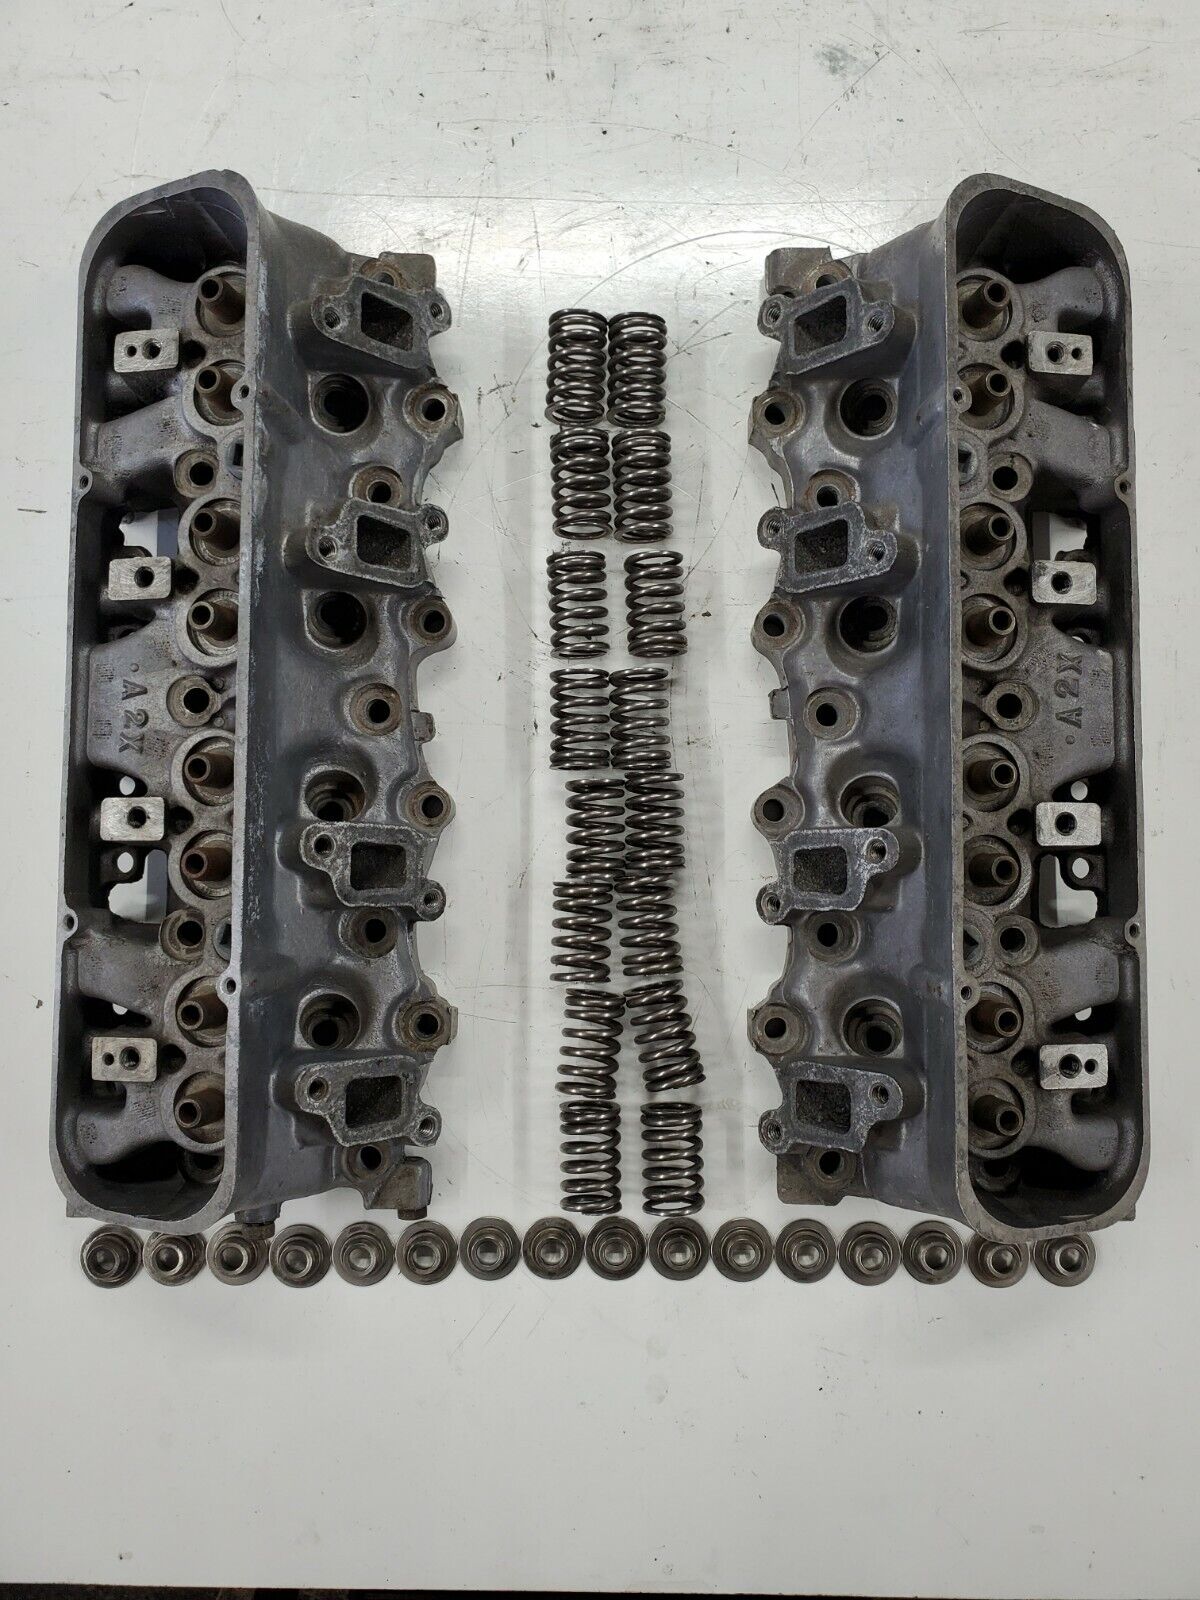 BUICK 215 V8 CYLINDER HEADS SPRINGS & RETAINERS